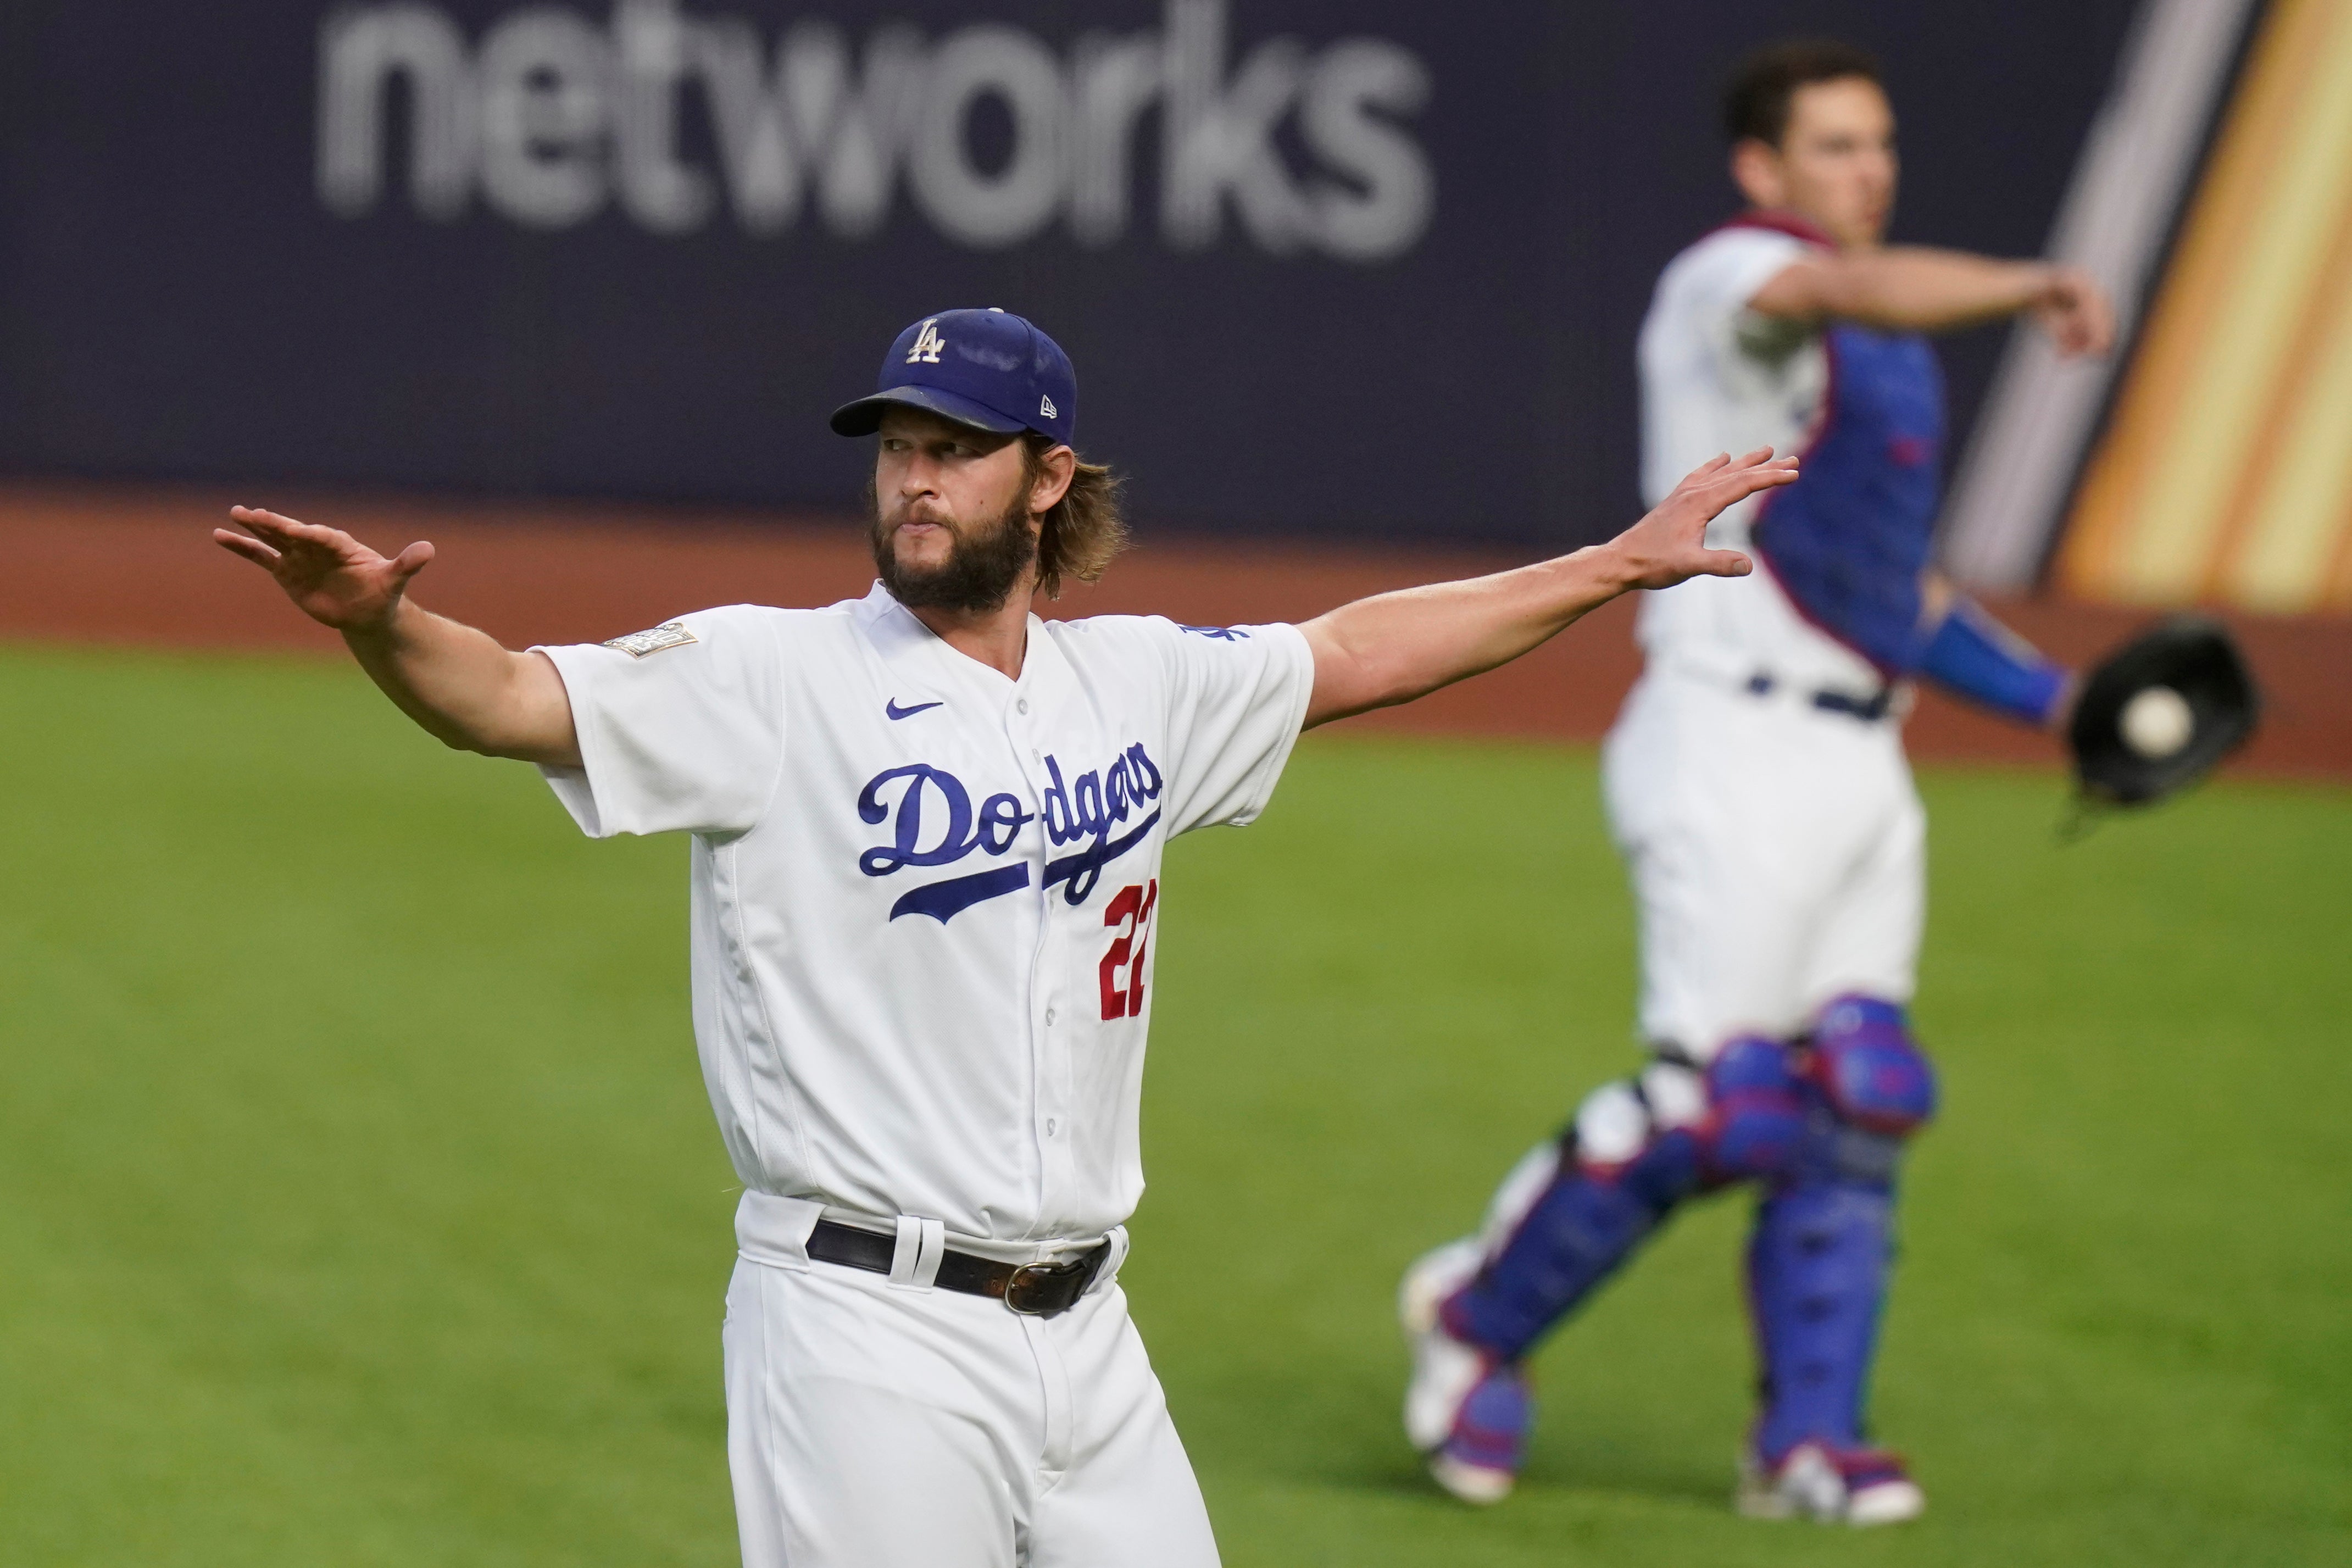 Dodgers' Clayton Kershaw may not dominate, but he's still an ace